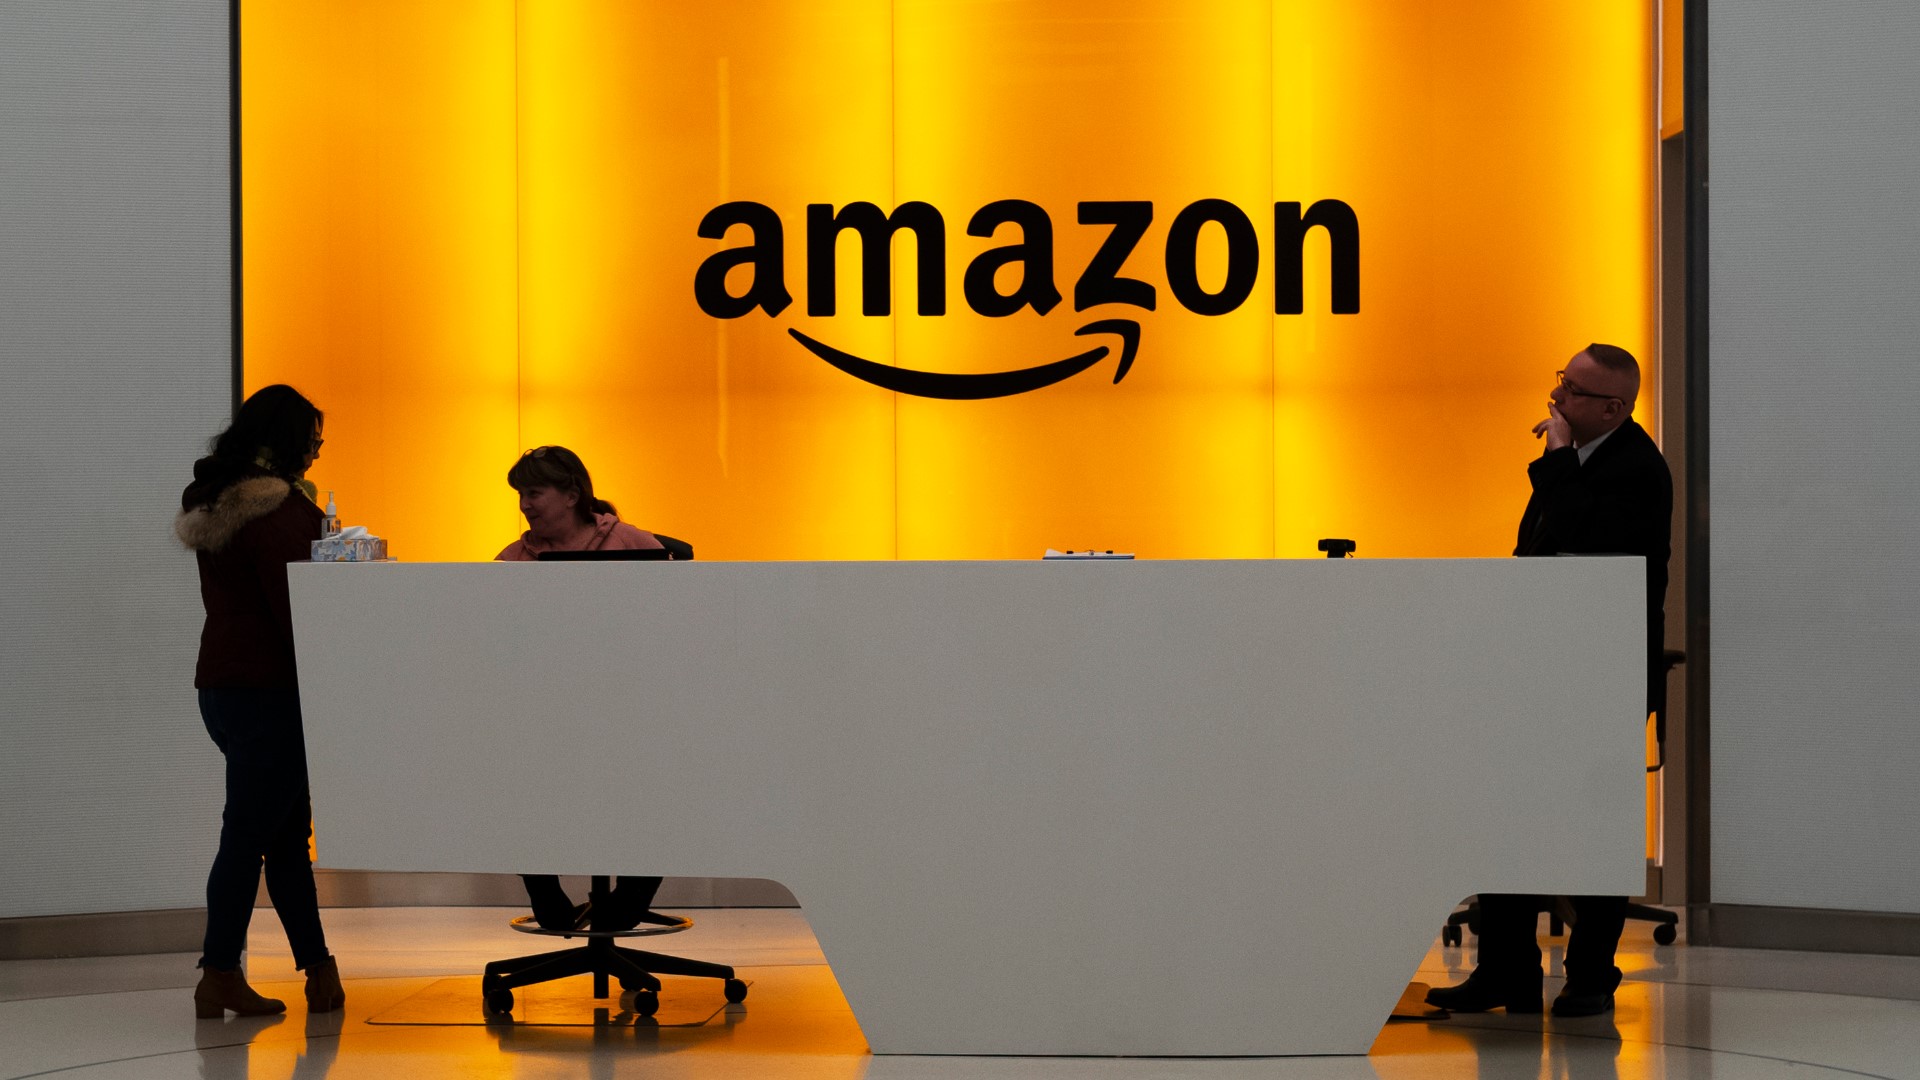 A 2020 survey from PCMag of 1,000 U.S. shoppers found only 16% of respondents were "very confident" they could detect fake Amazon product reviews.